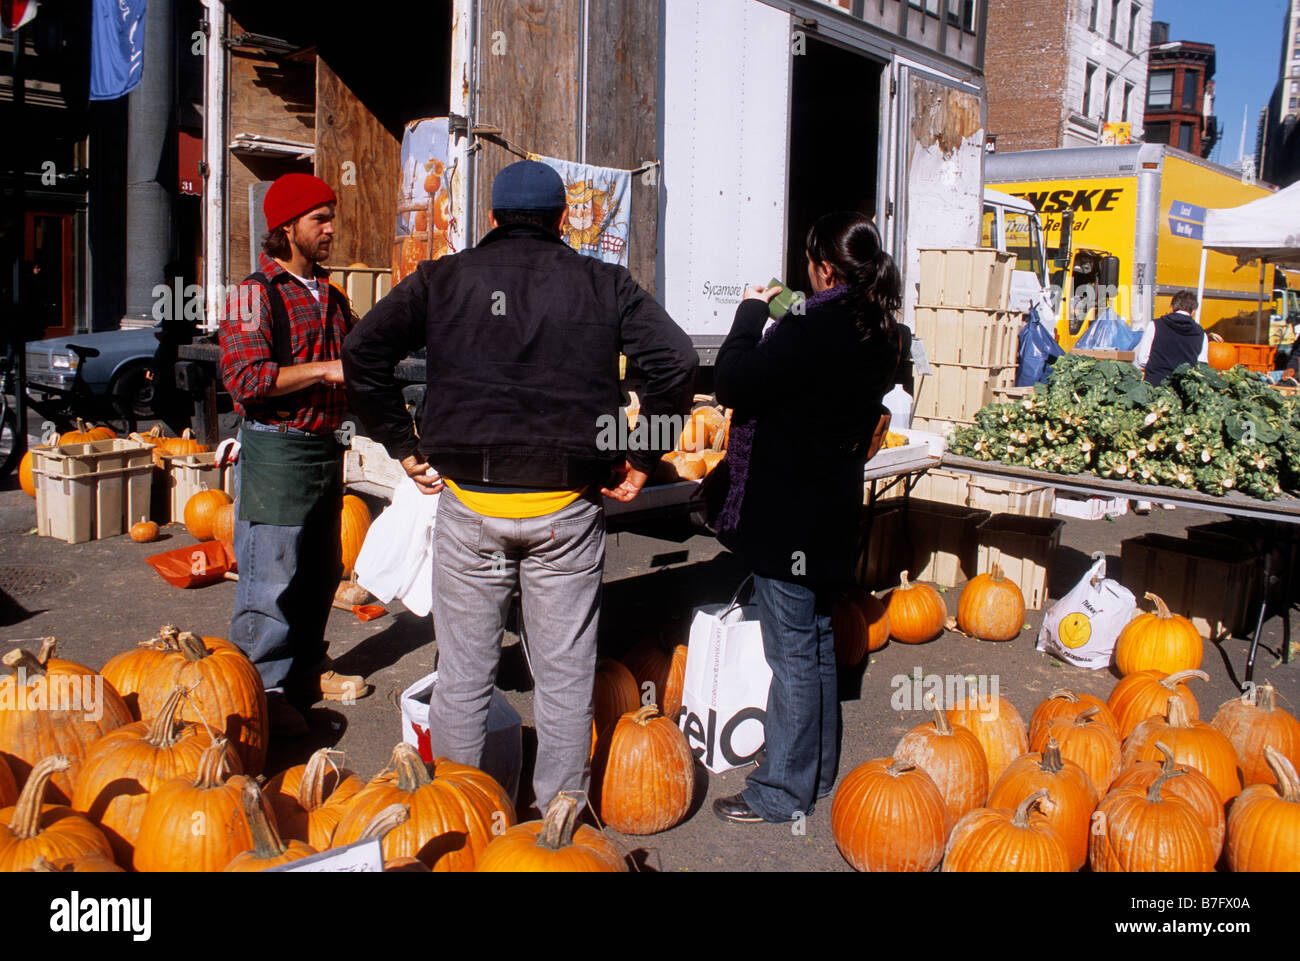 Pumpkin sales at New York City Union Square Green Market. Selling pumpkins on the street from a truck in the Flatiron District. USA Stock Photo